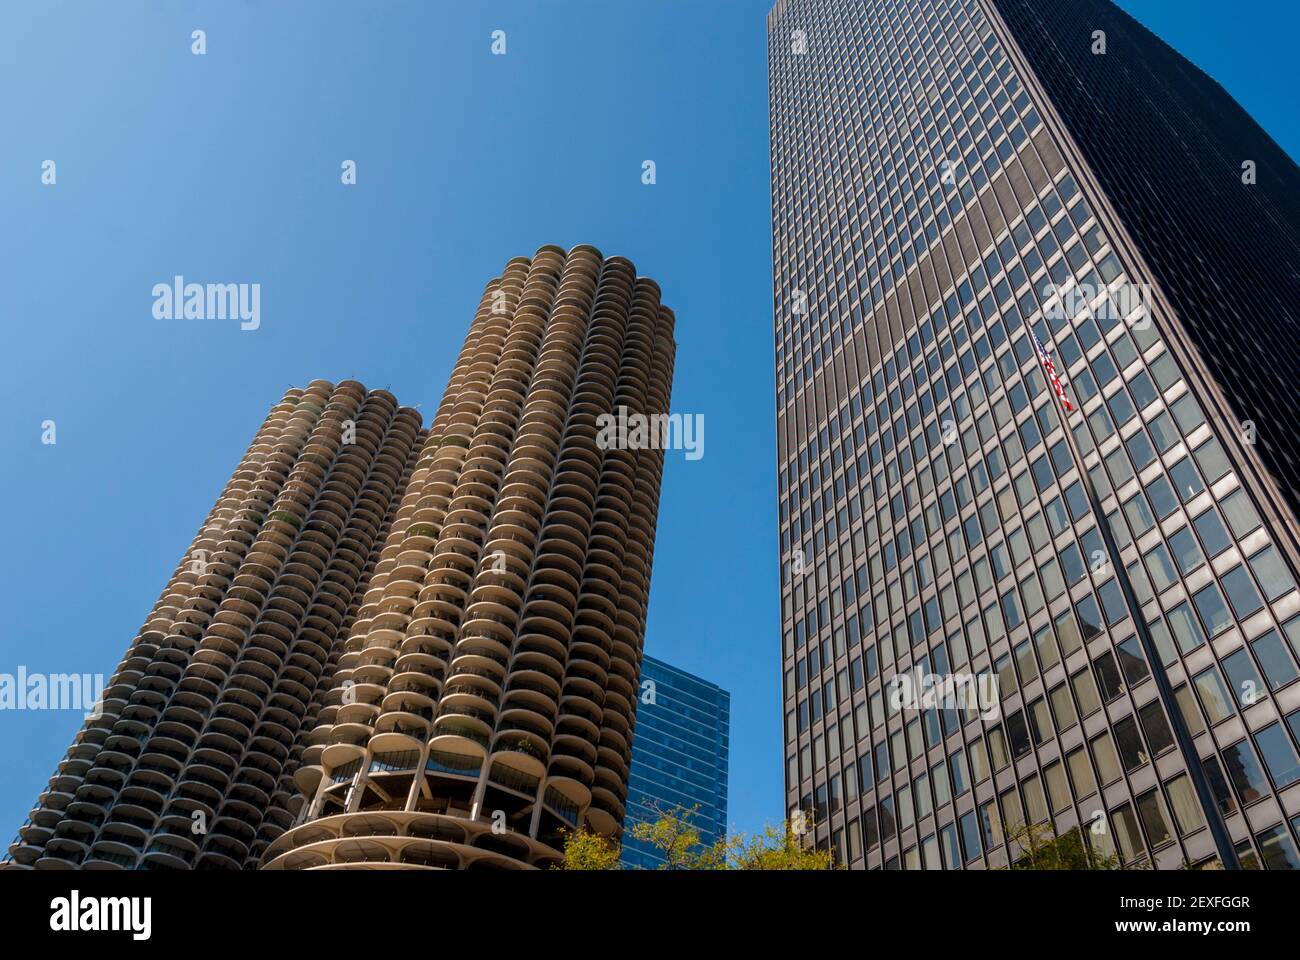 Marina City towers on the left and AMA Plaza building on the right, Chicago Illinois. Stock Photo